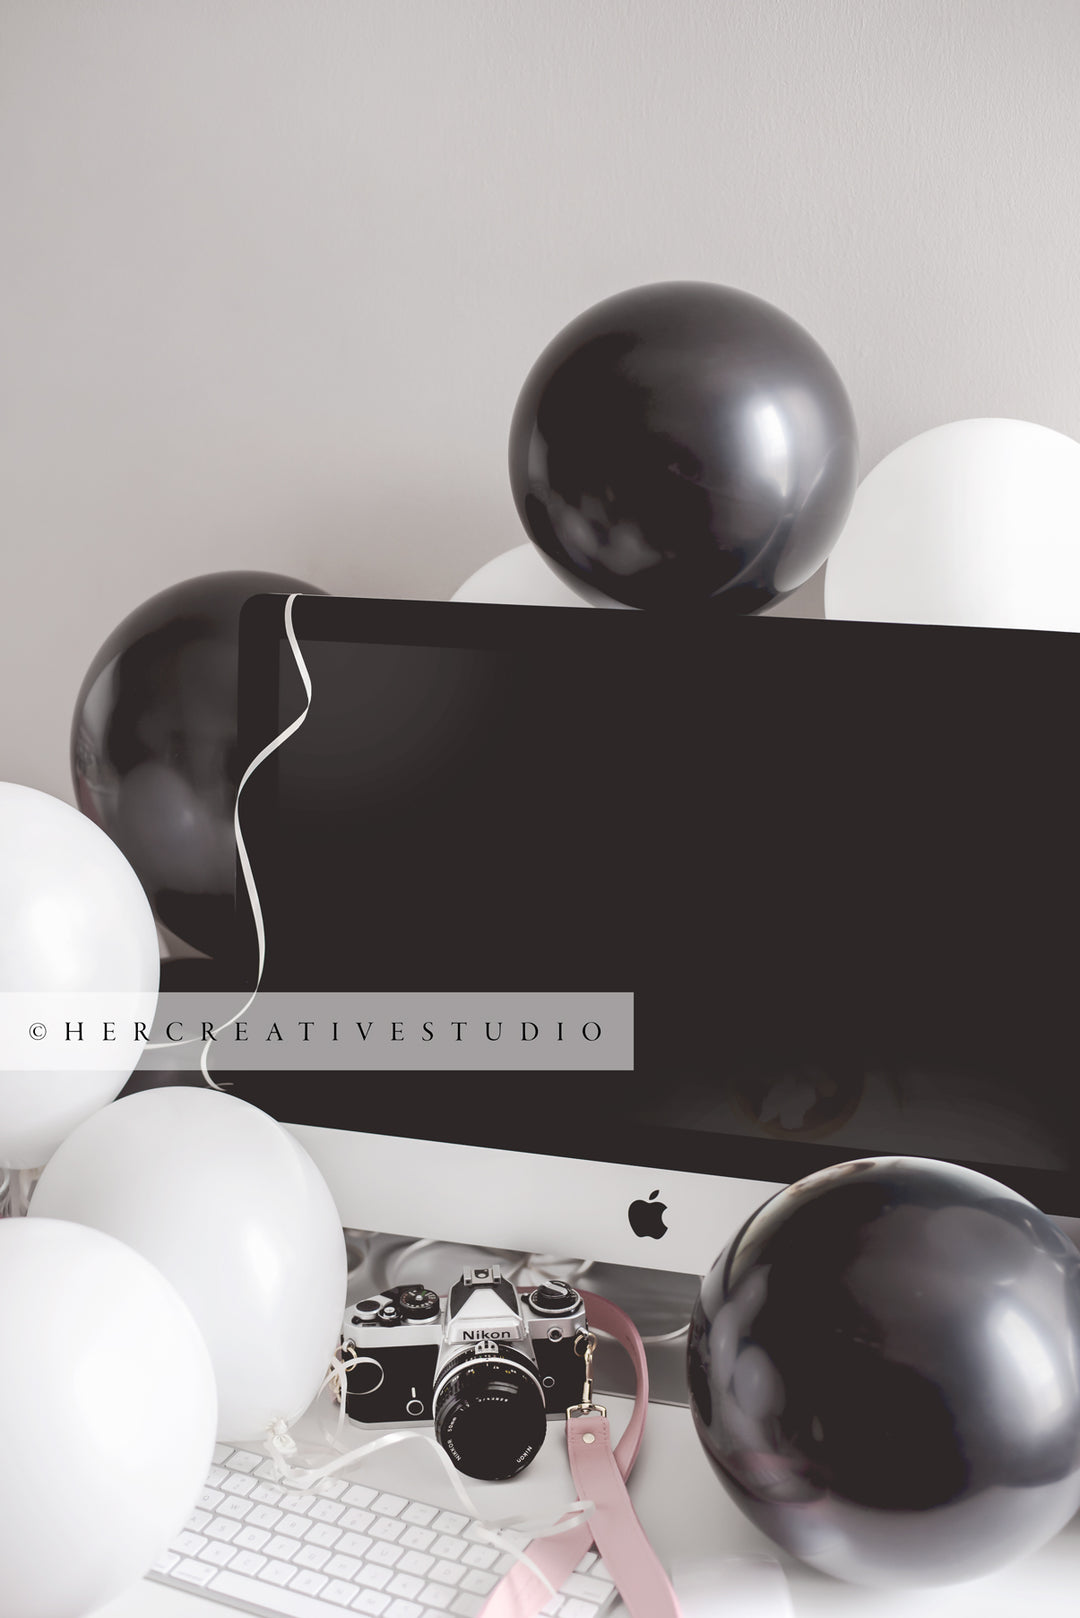 Black Balloons on Workspace, Styled Stock Image